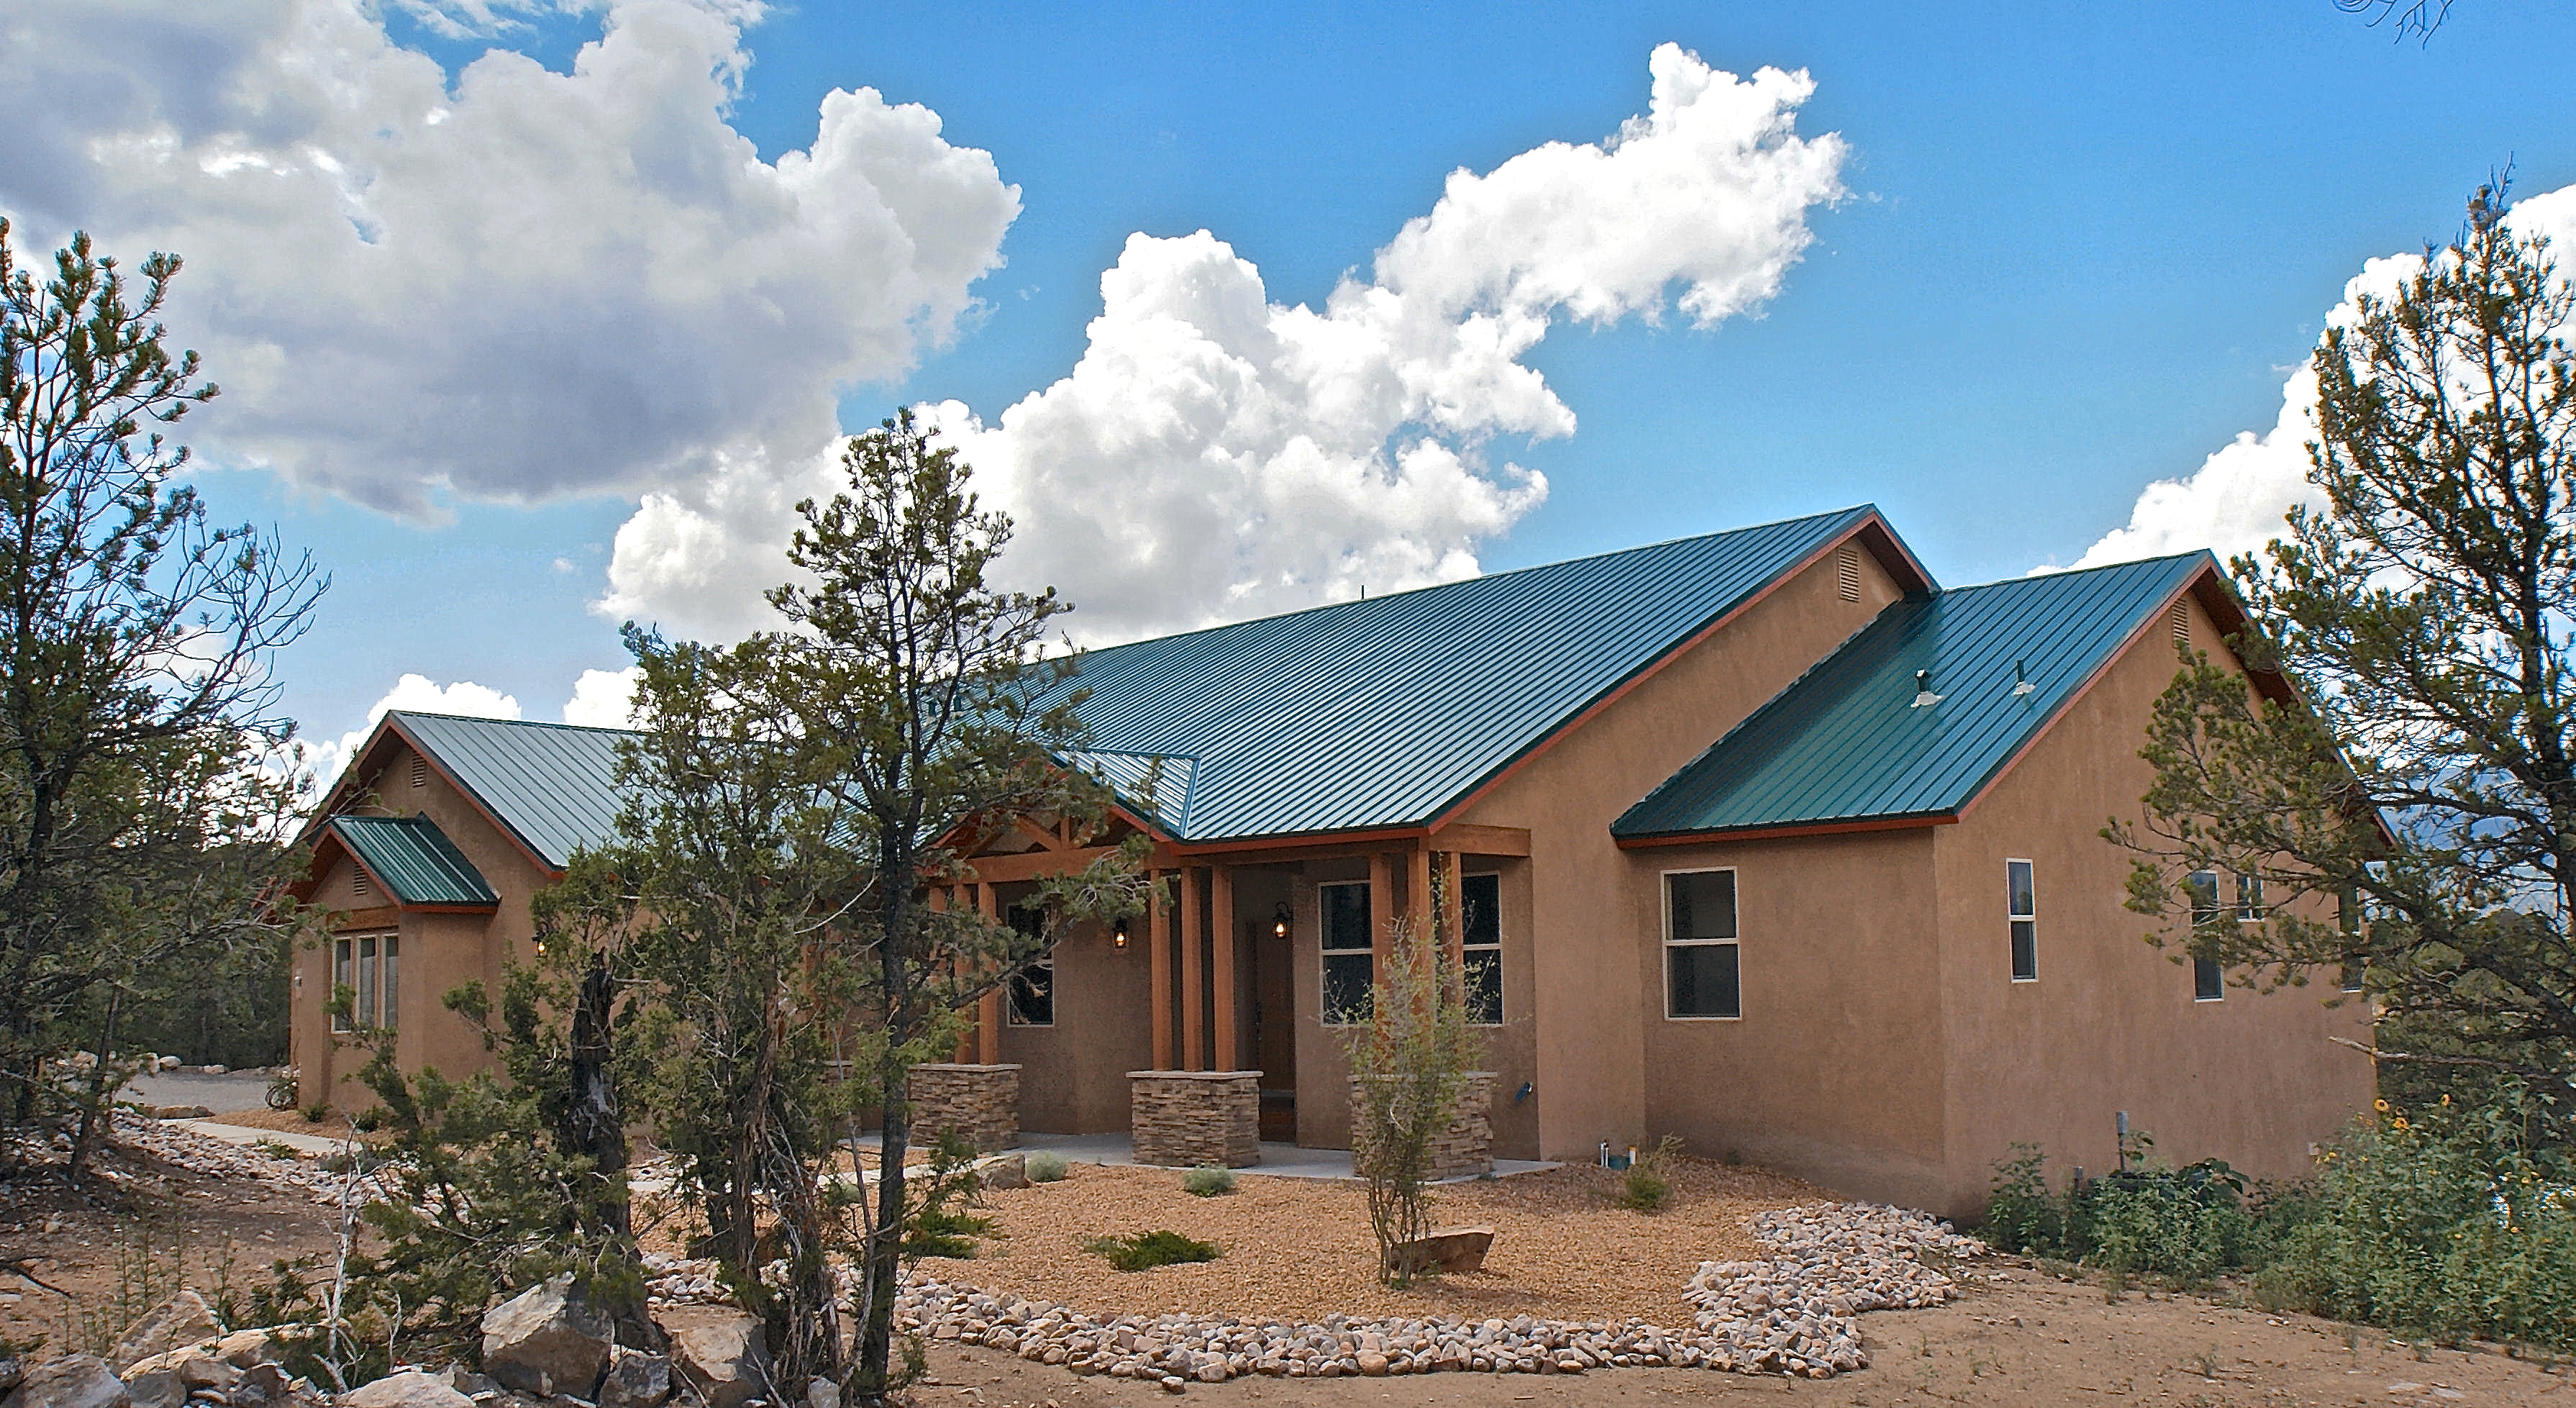 Lee Michael Homes Custom Home in New Mexico